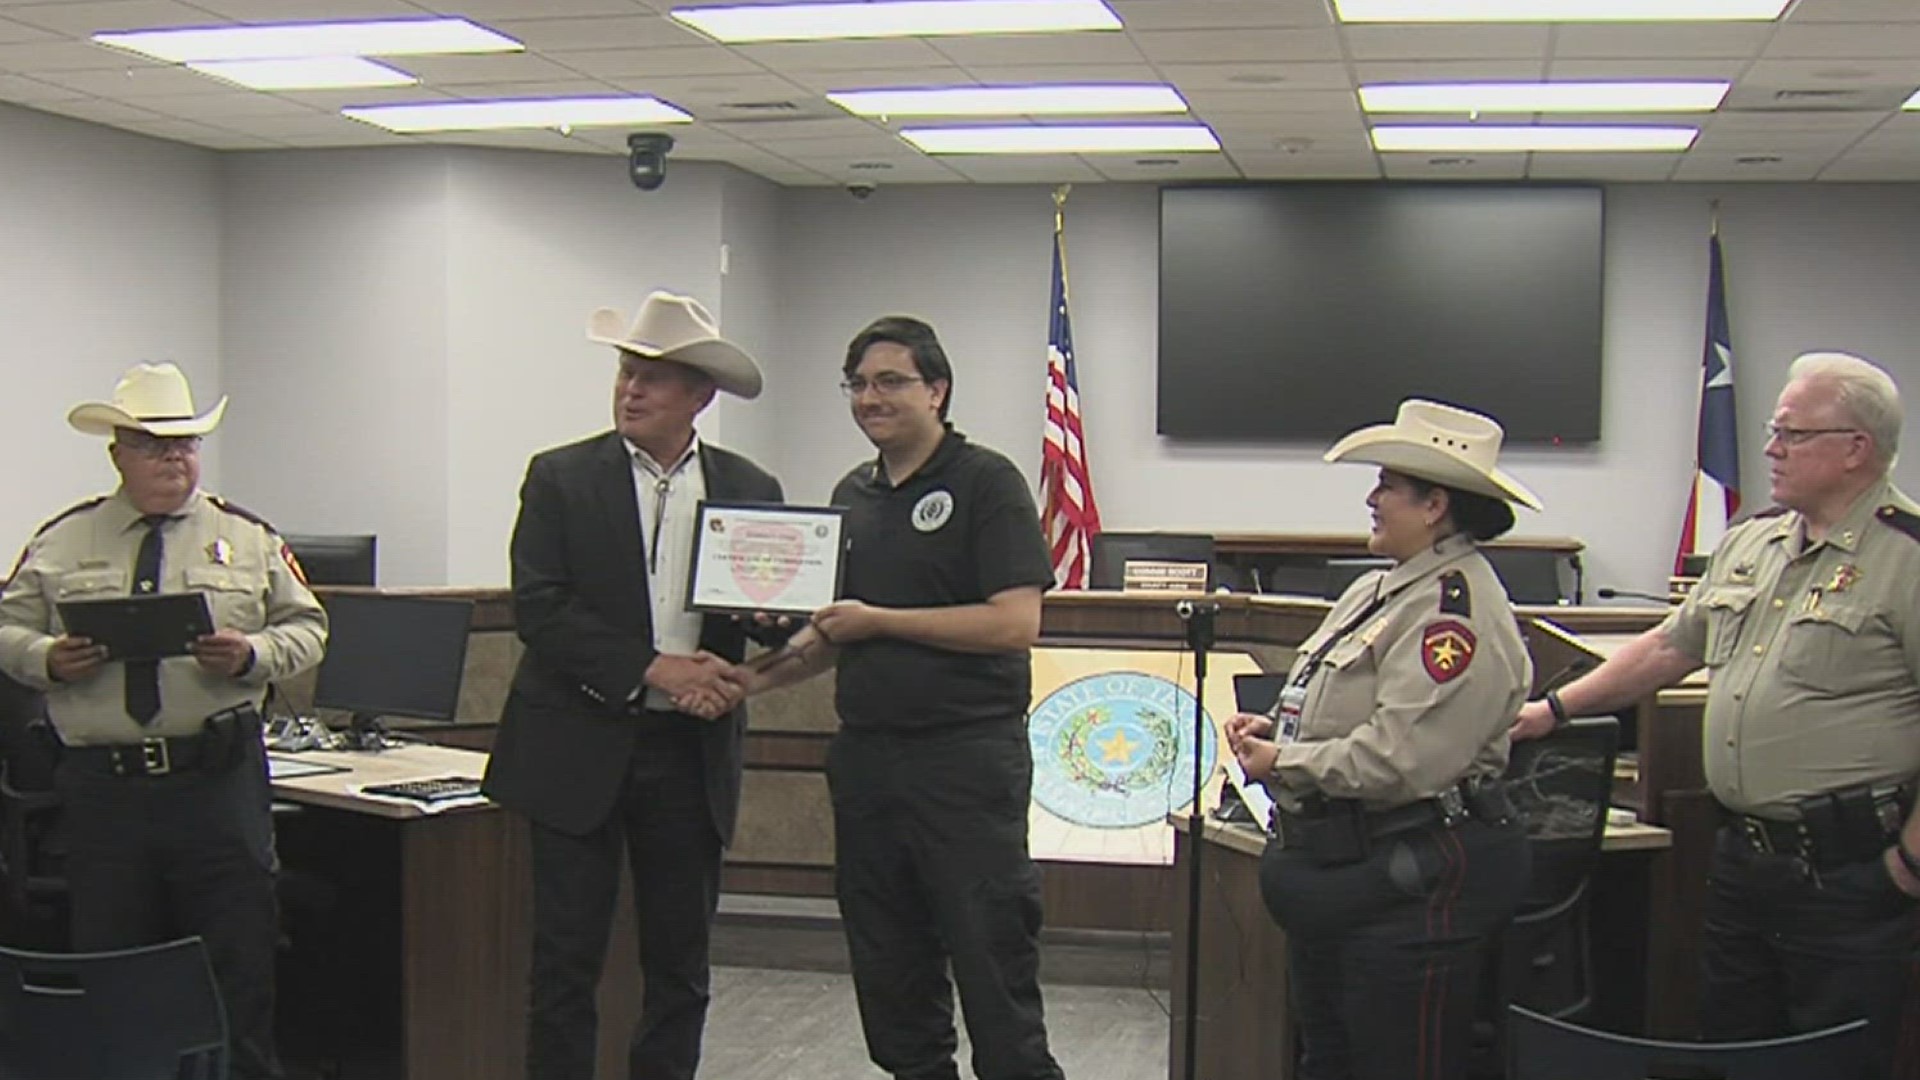 The program grants the new graduates licenses to be correctional officers, adding to the list of CO's in Nueces County.